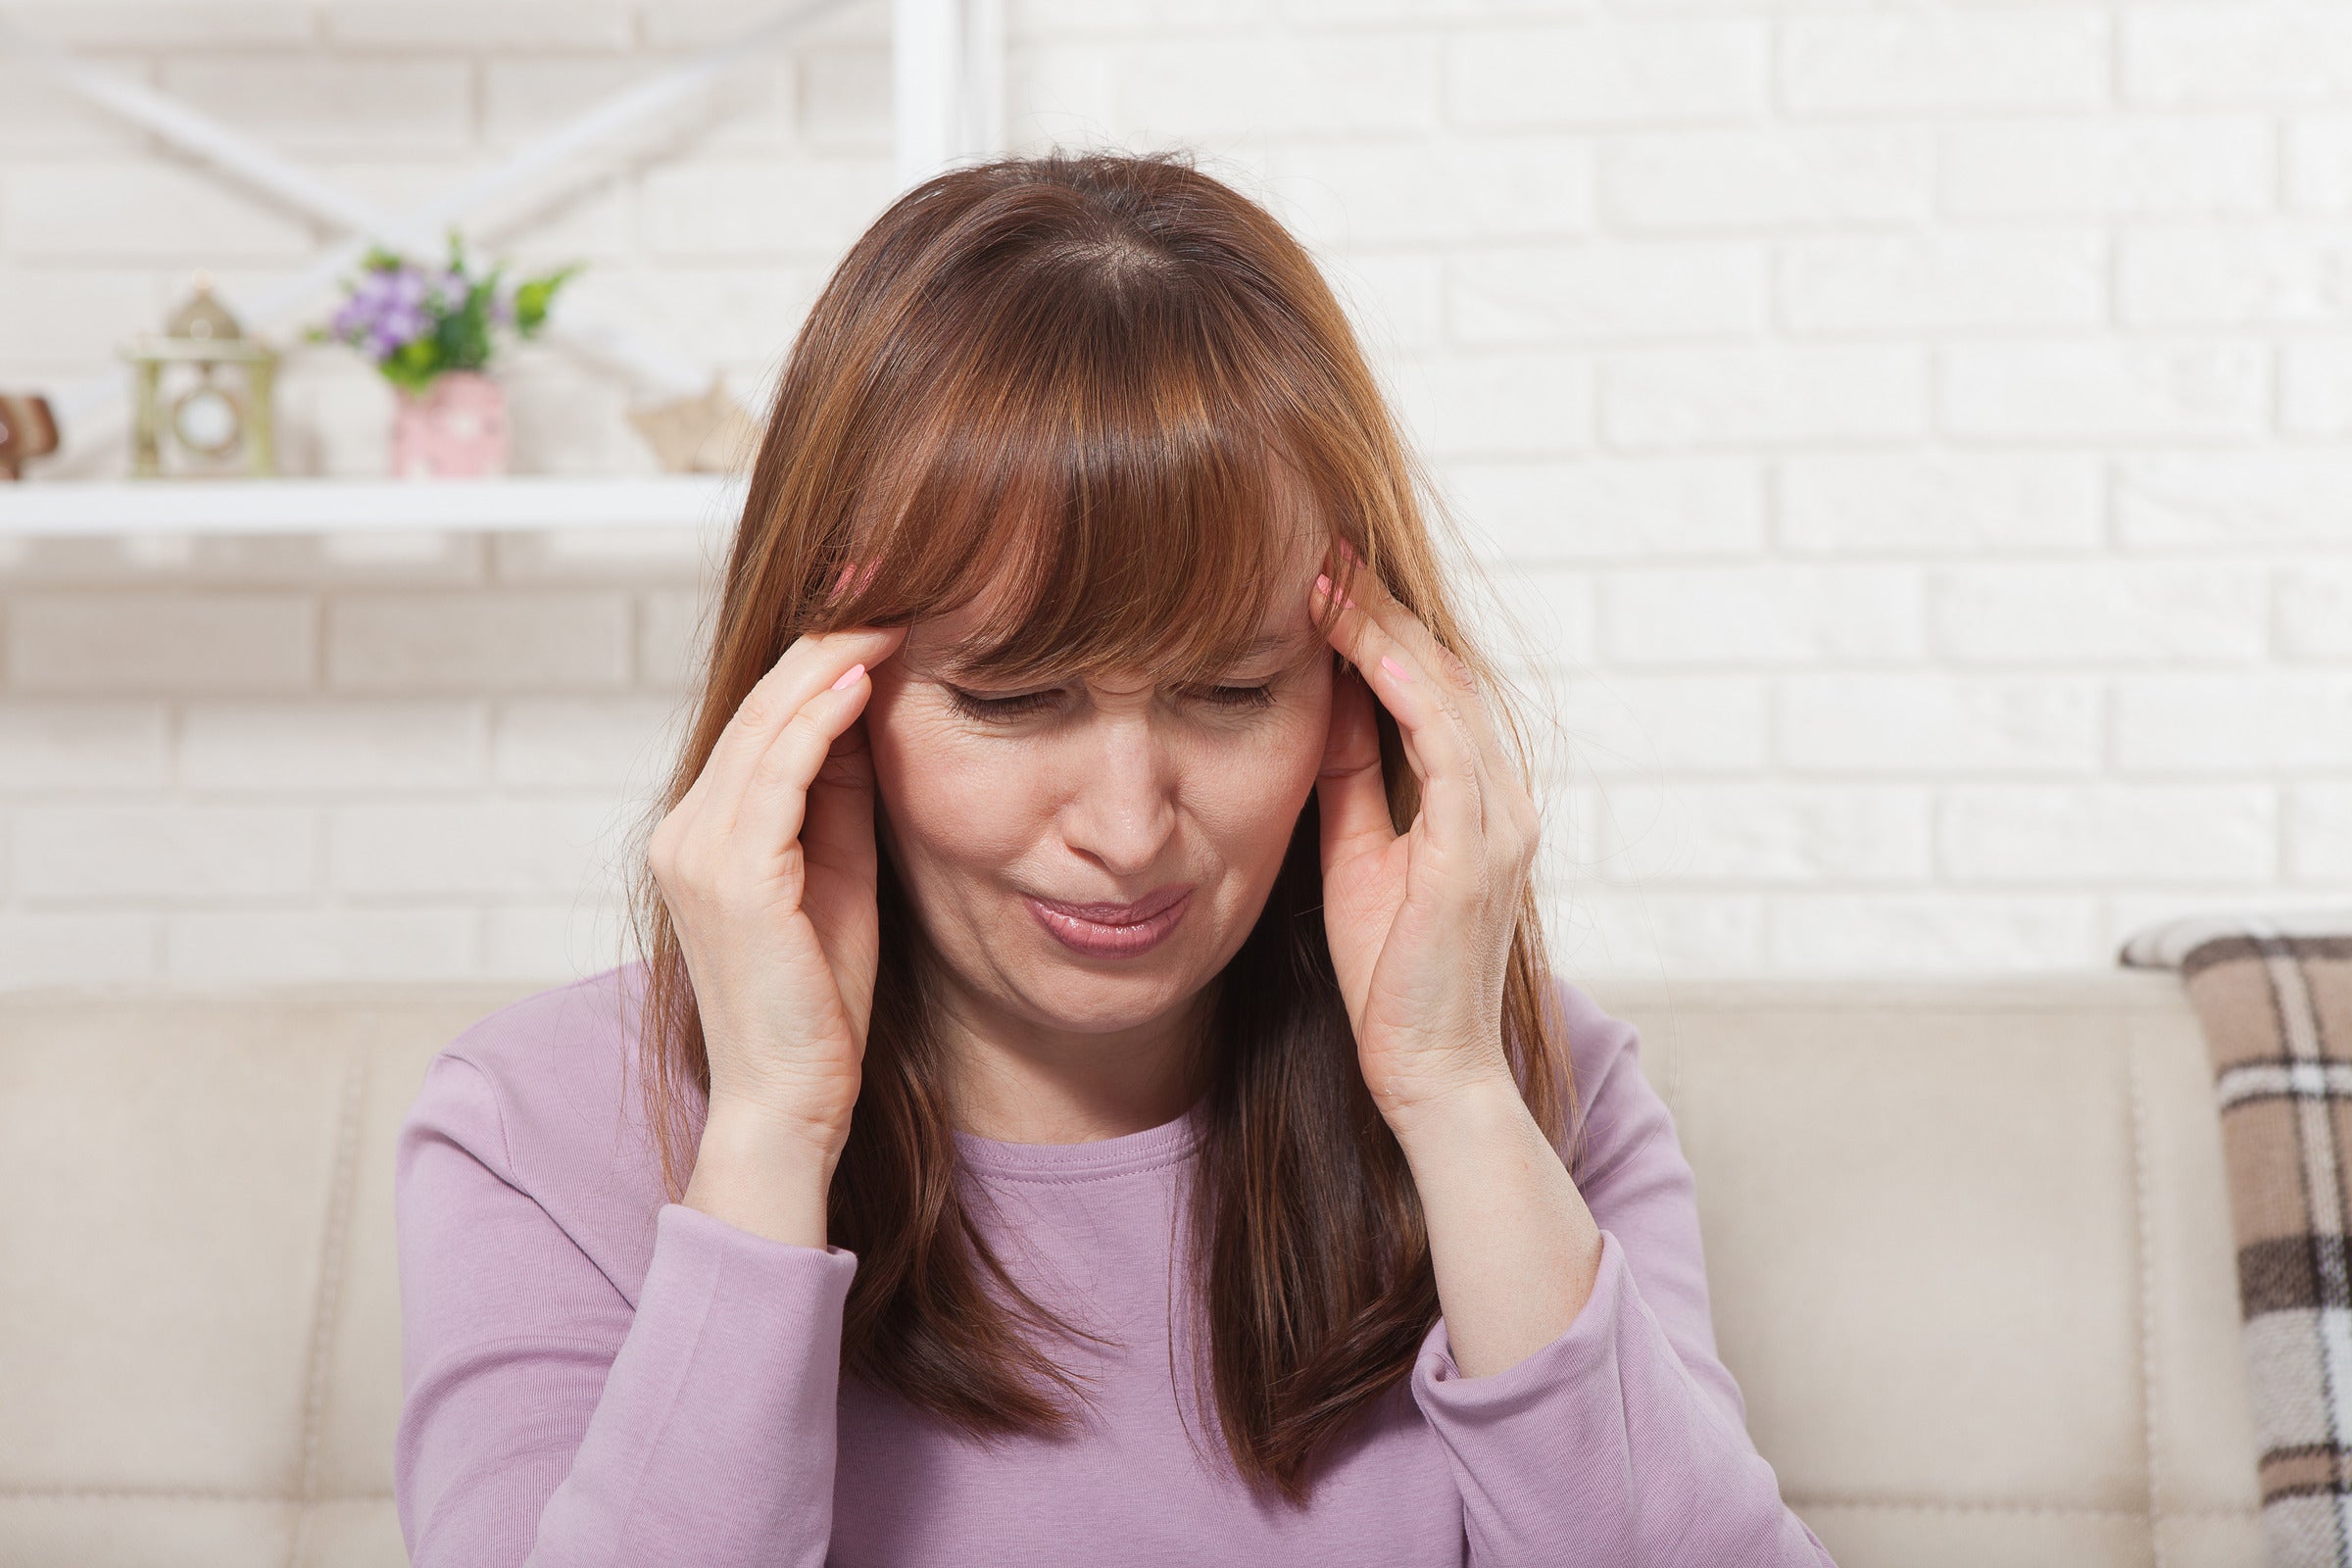 A long-term solution for chronic migraines